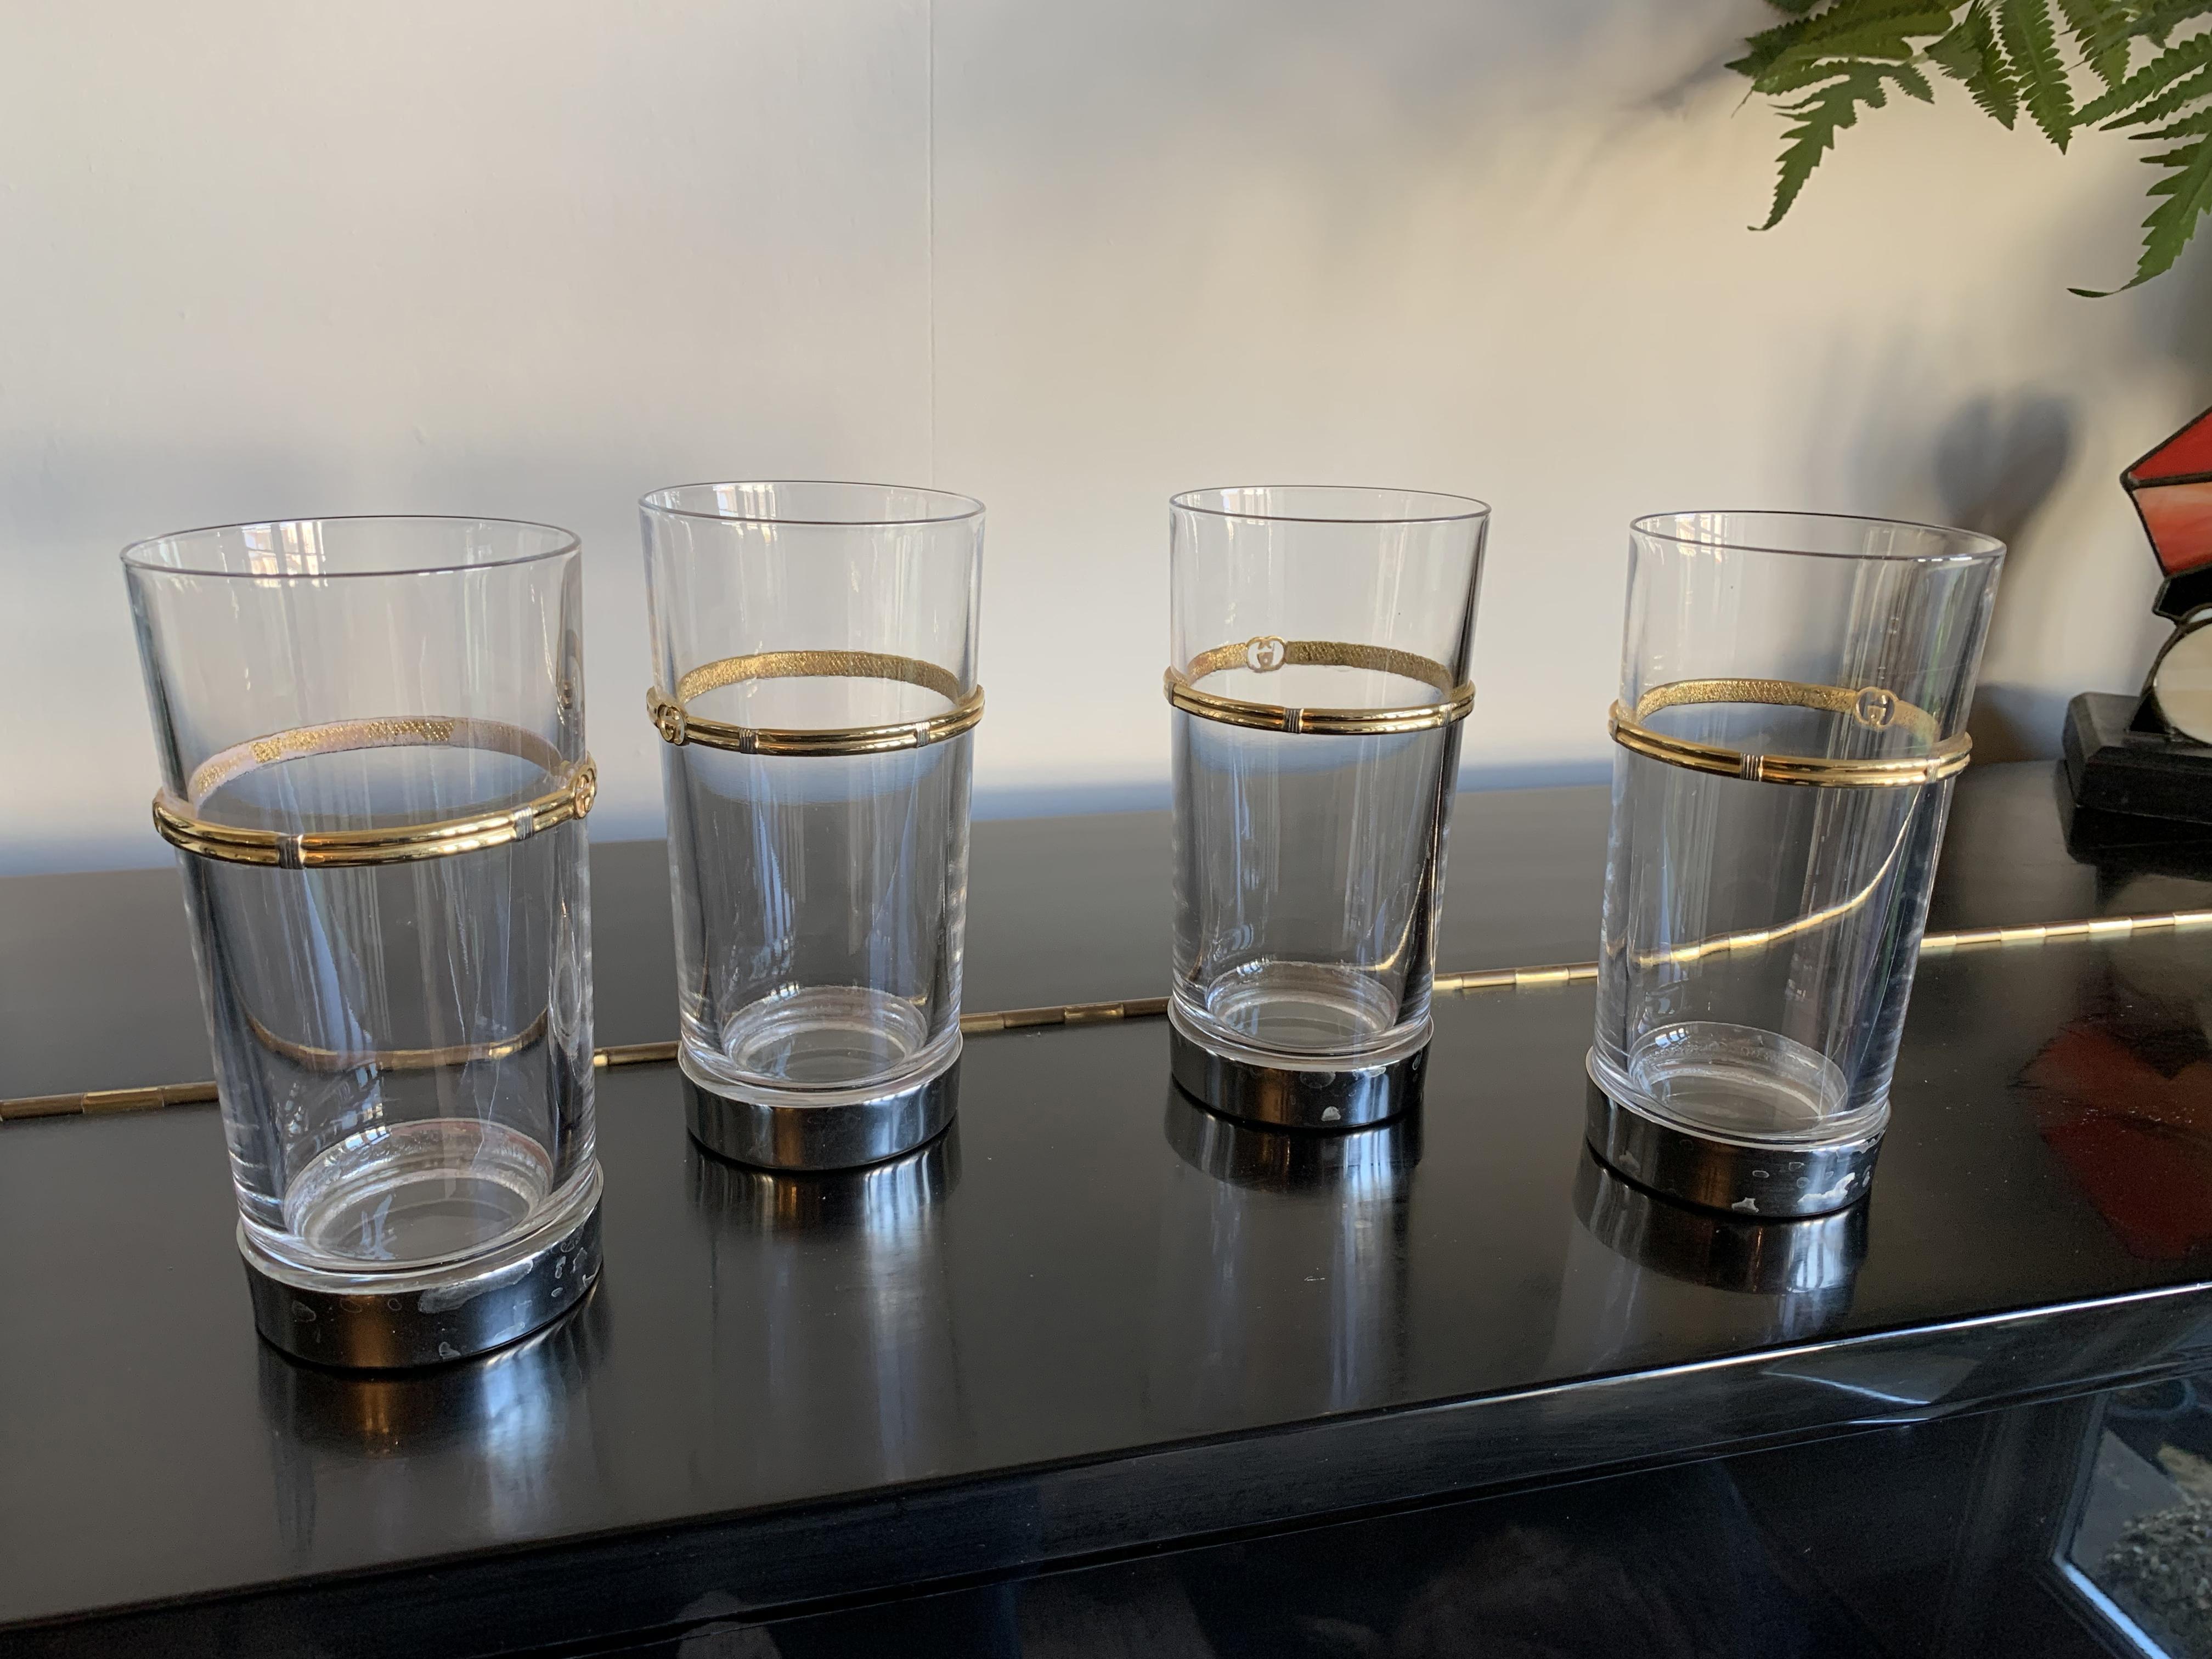 Vintage Gucci barware set of 4 Highball tumbler glasses. Crystal with Gold band with GG logo, silver plated base. Made by Gucci in Italy, stamped on base. Mid century 1970s. There are some light marks /scratches/ discoloration consistent with age,